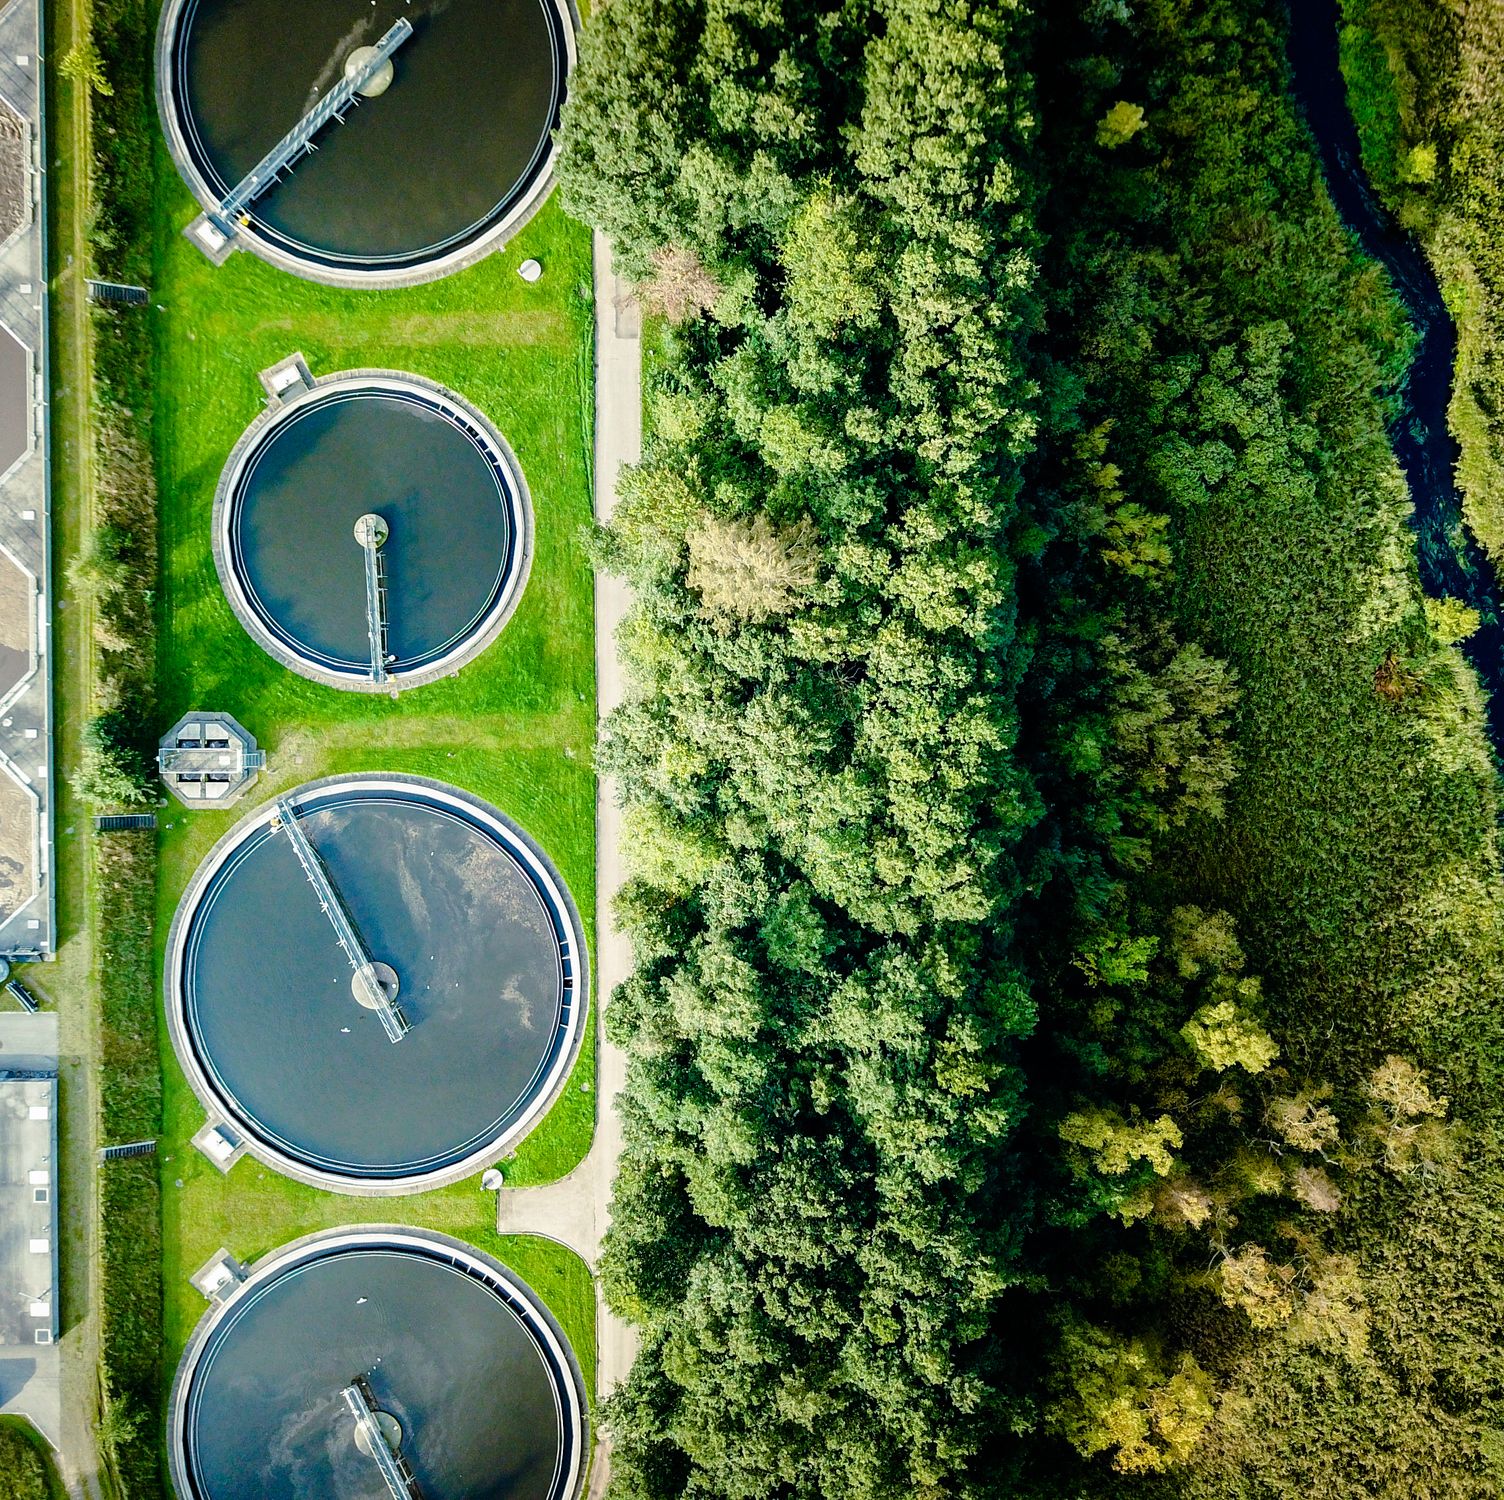 What Happens After You Flush: How Wastewater Treatment Plants Transform Sewage Into Safe Water